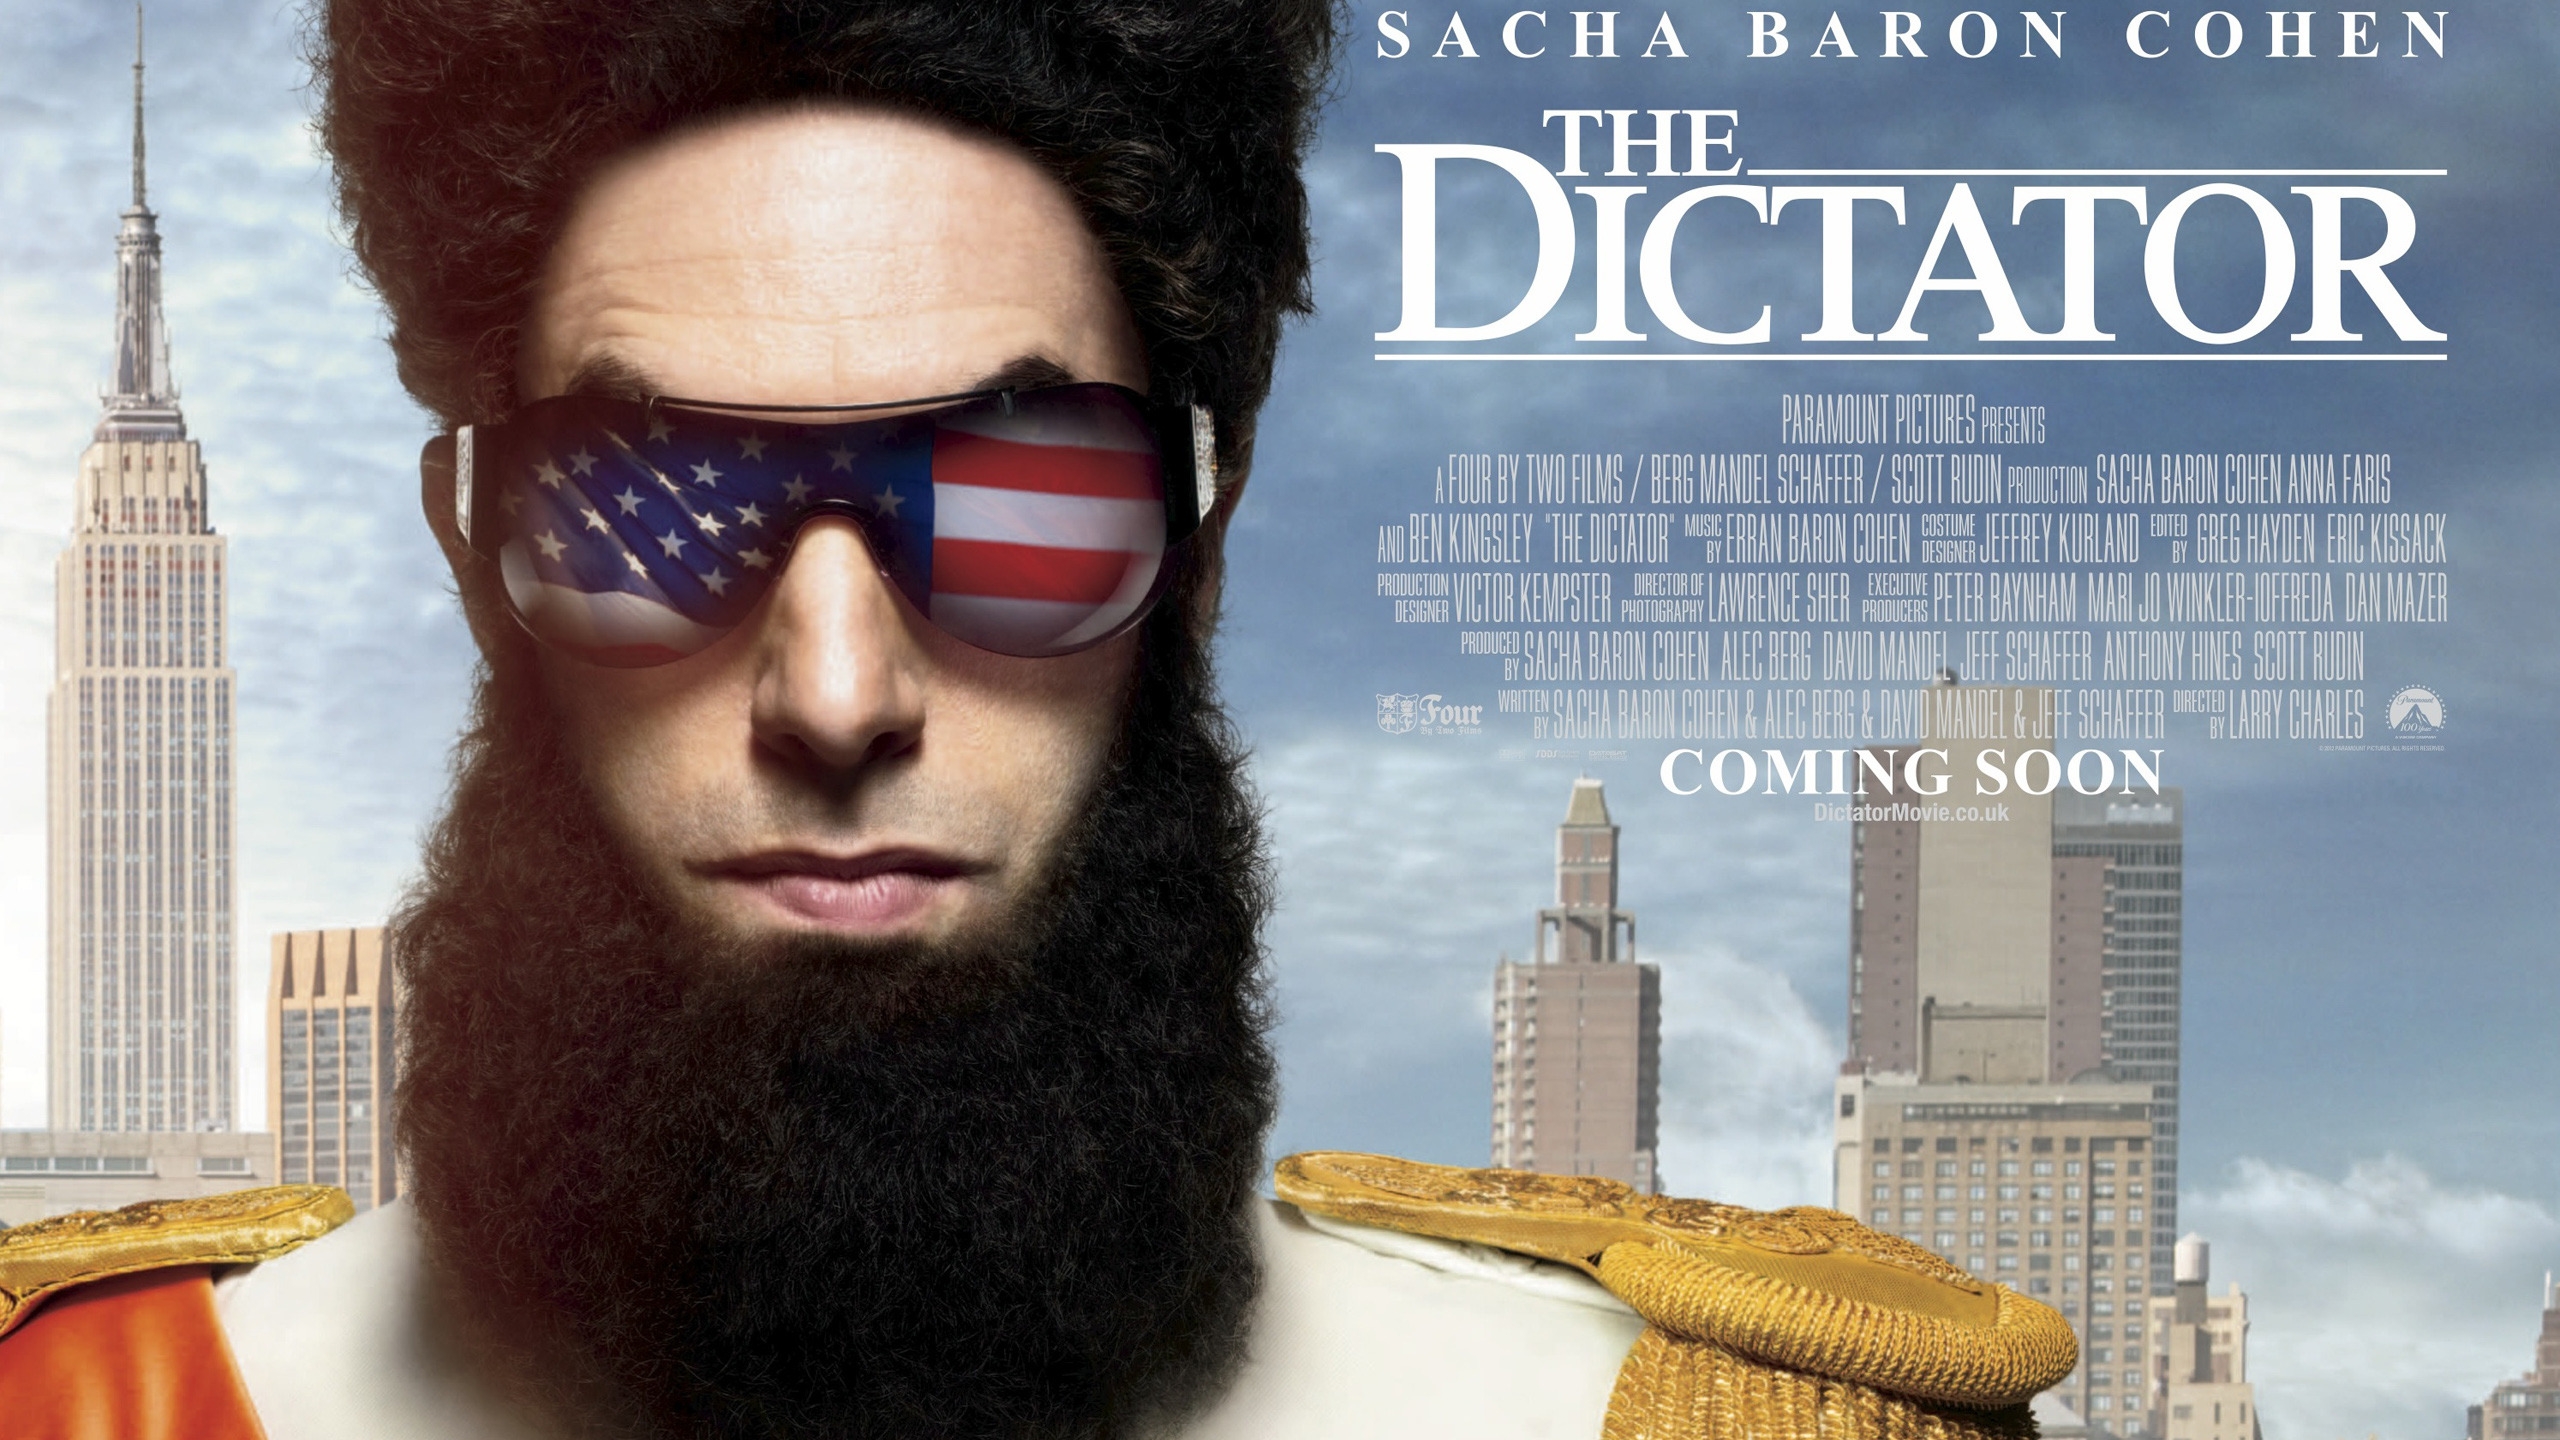 The Dictator Film for 2560x1440 HDTV resolution